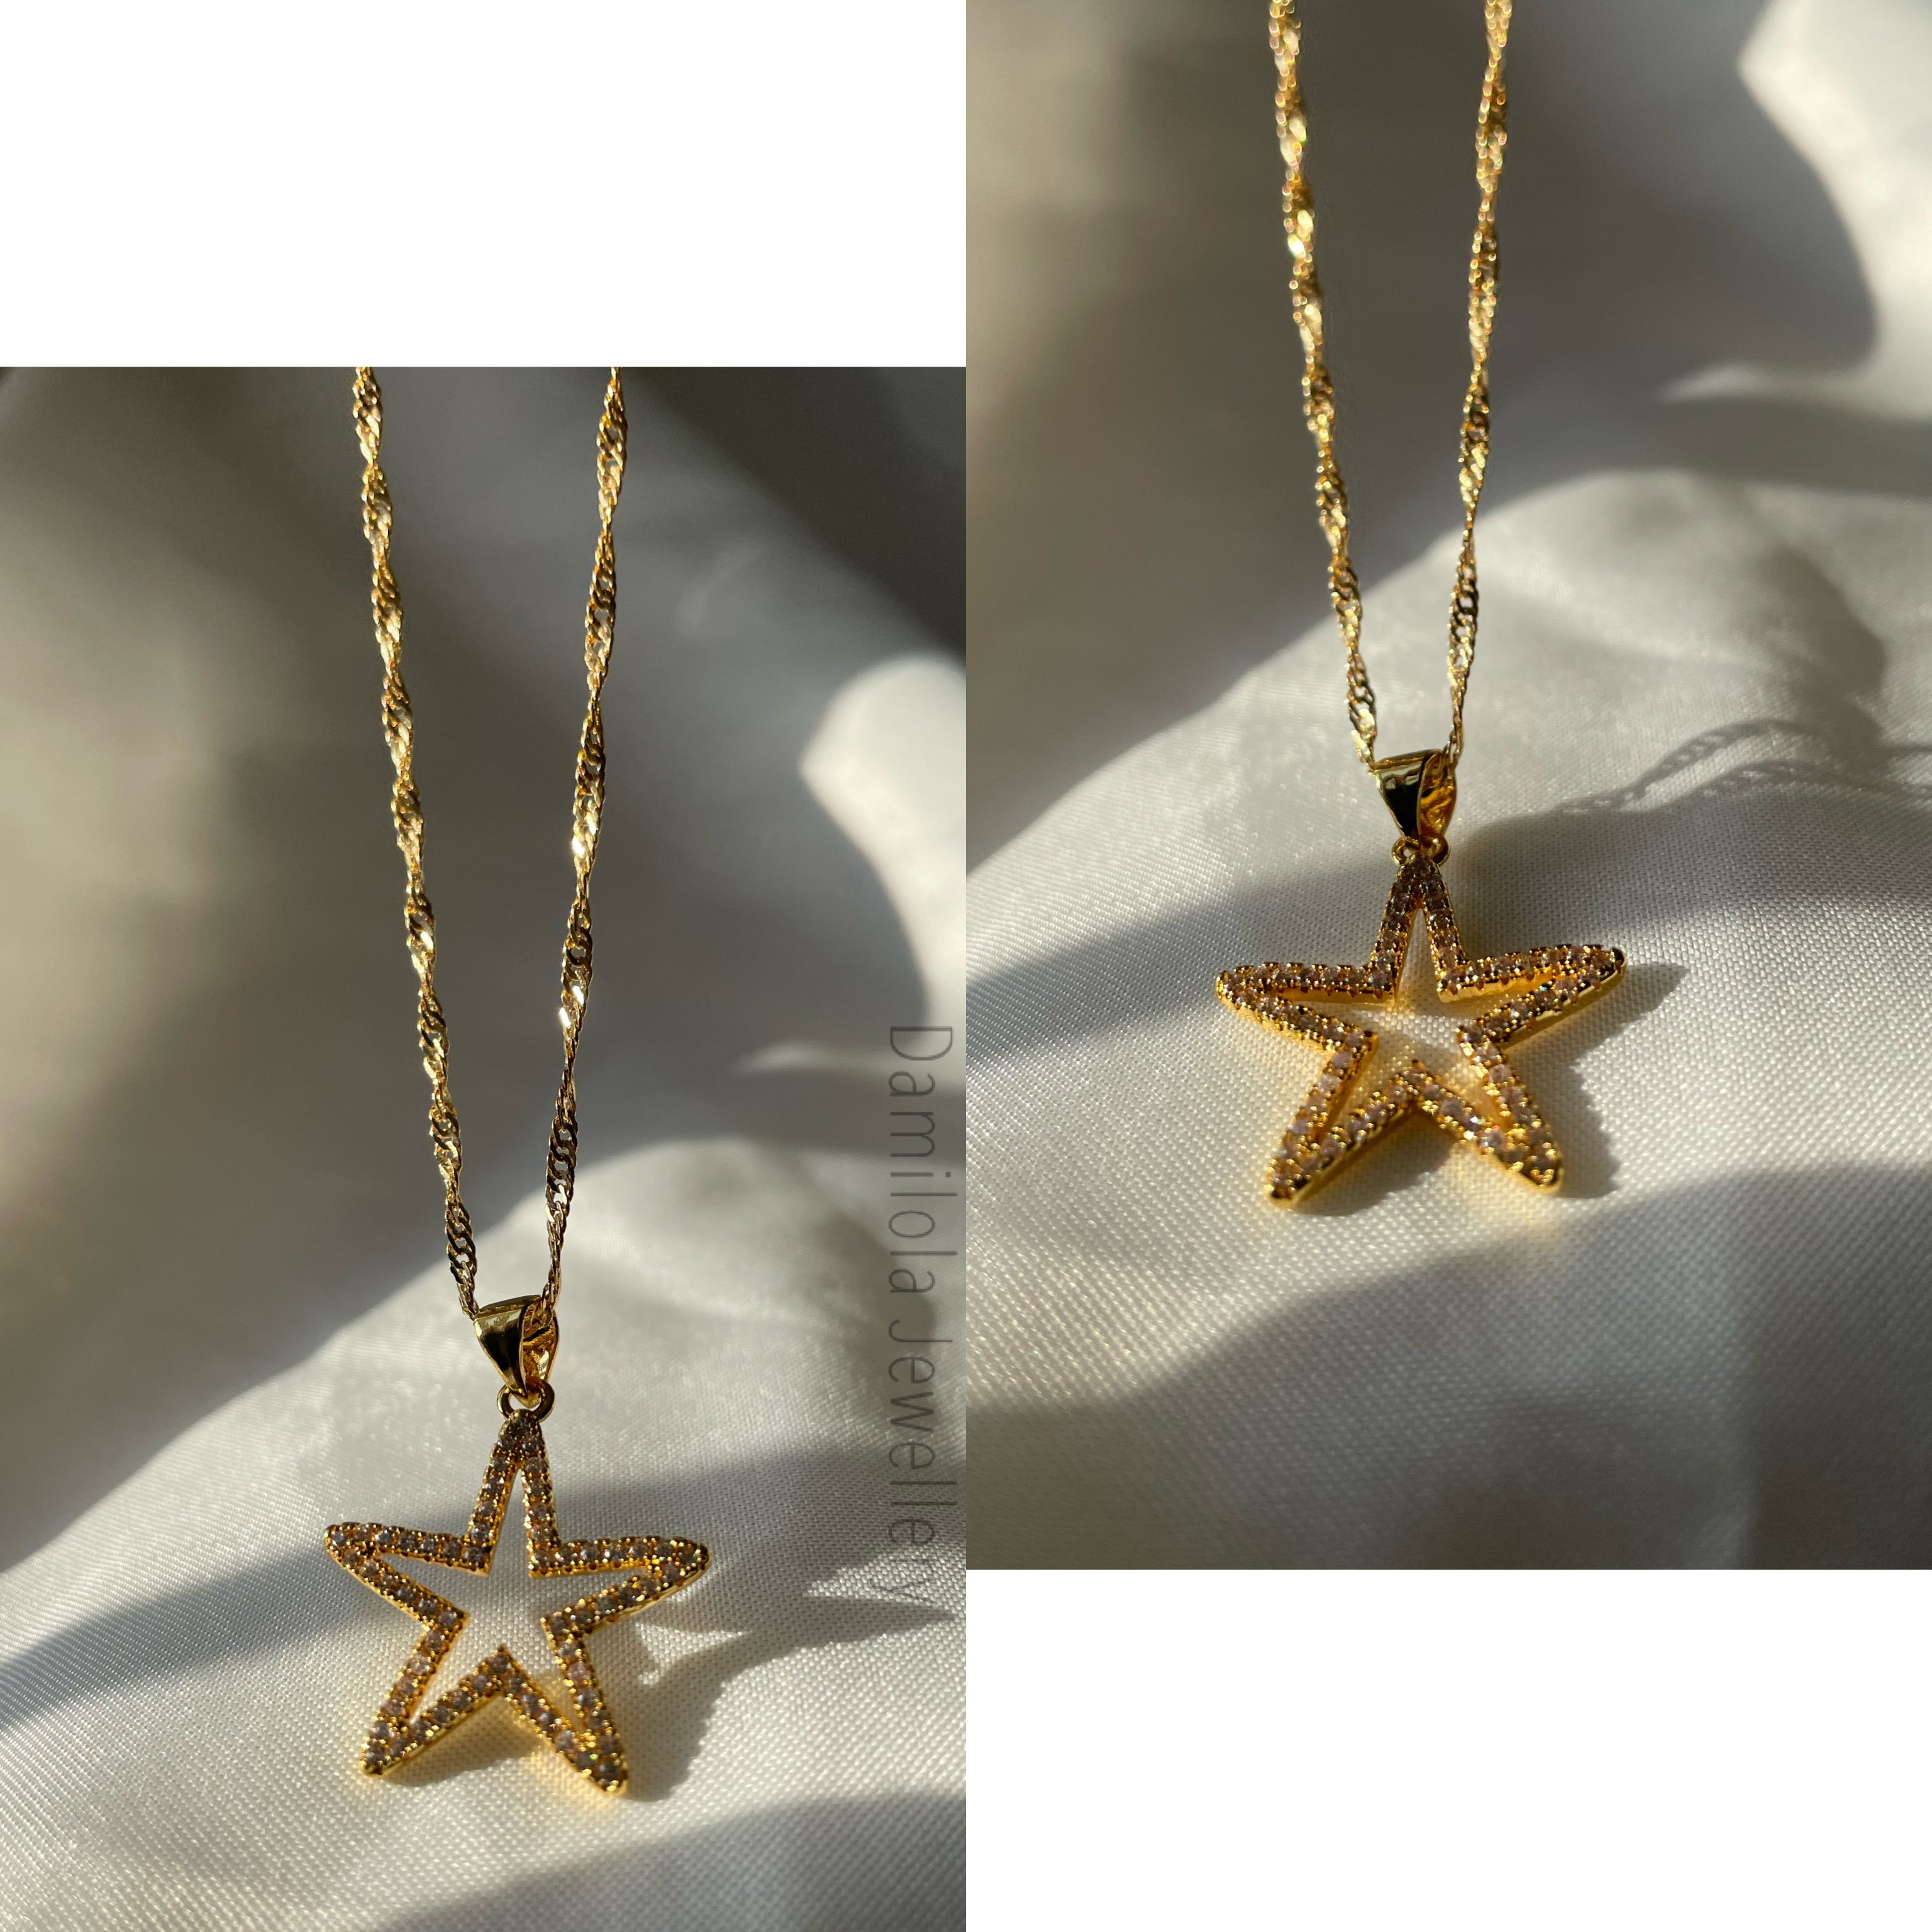 ‘Star’ Necklace - Follow Your Star